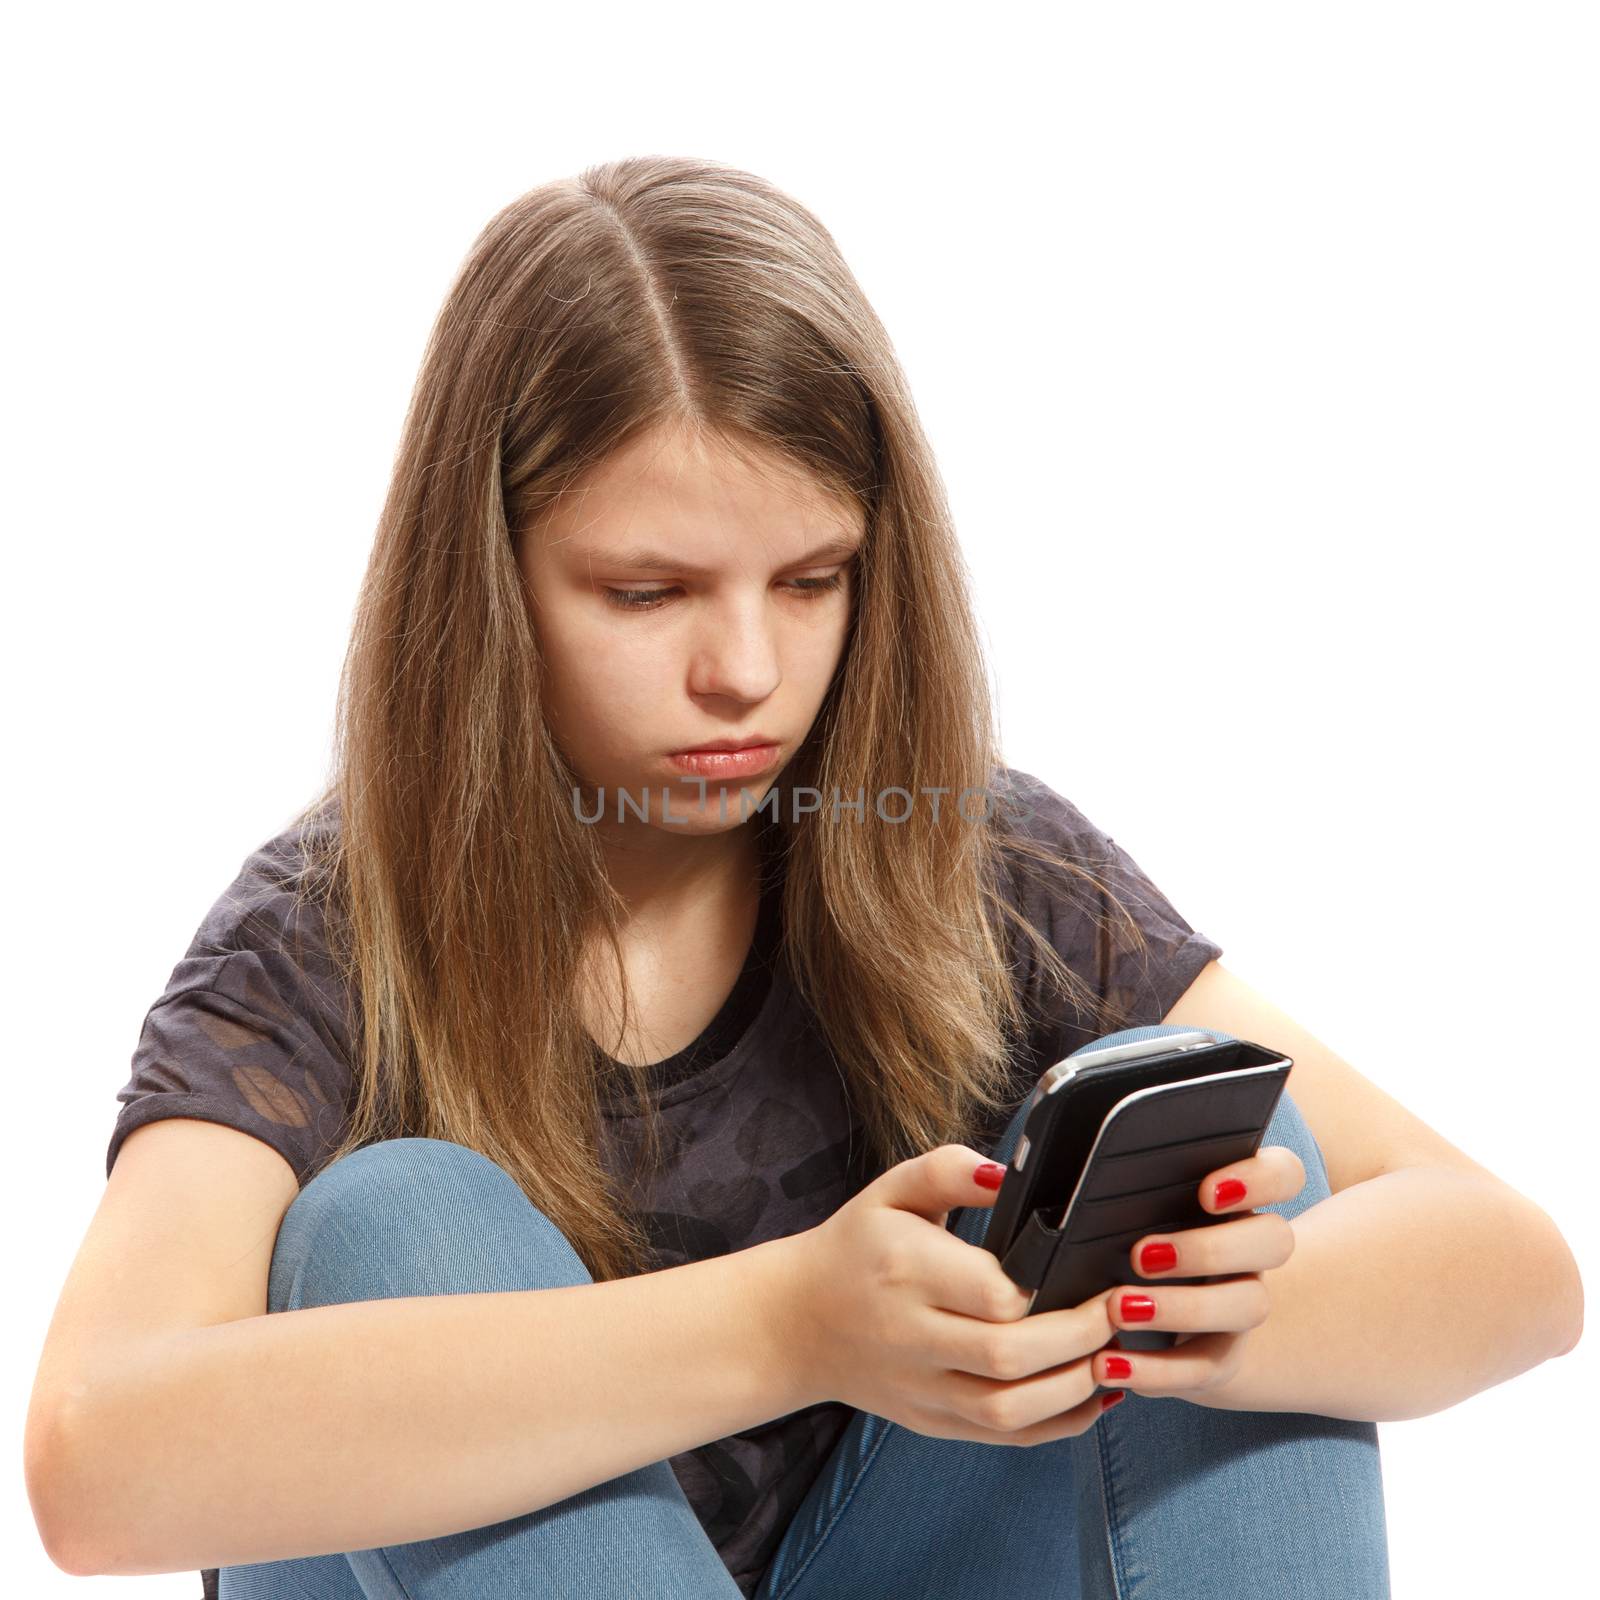 A teenage girl working with her smartphone